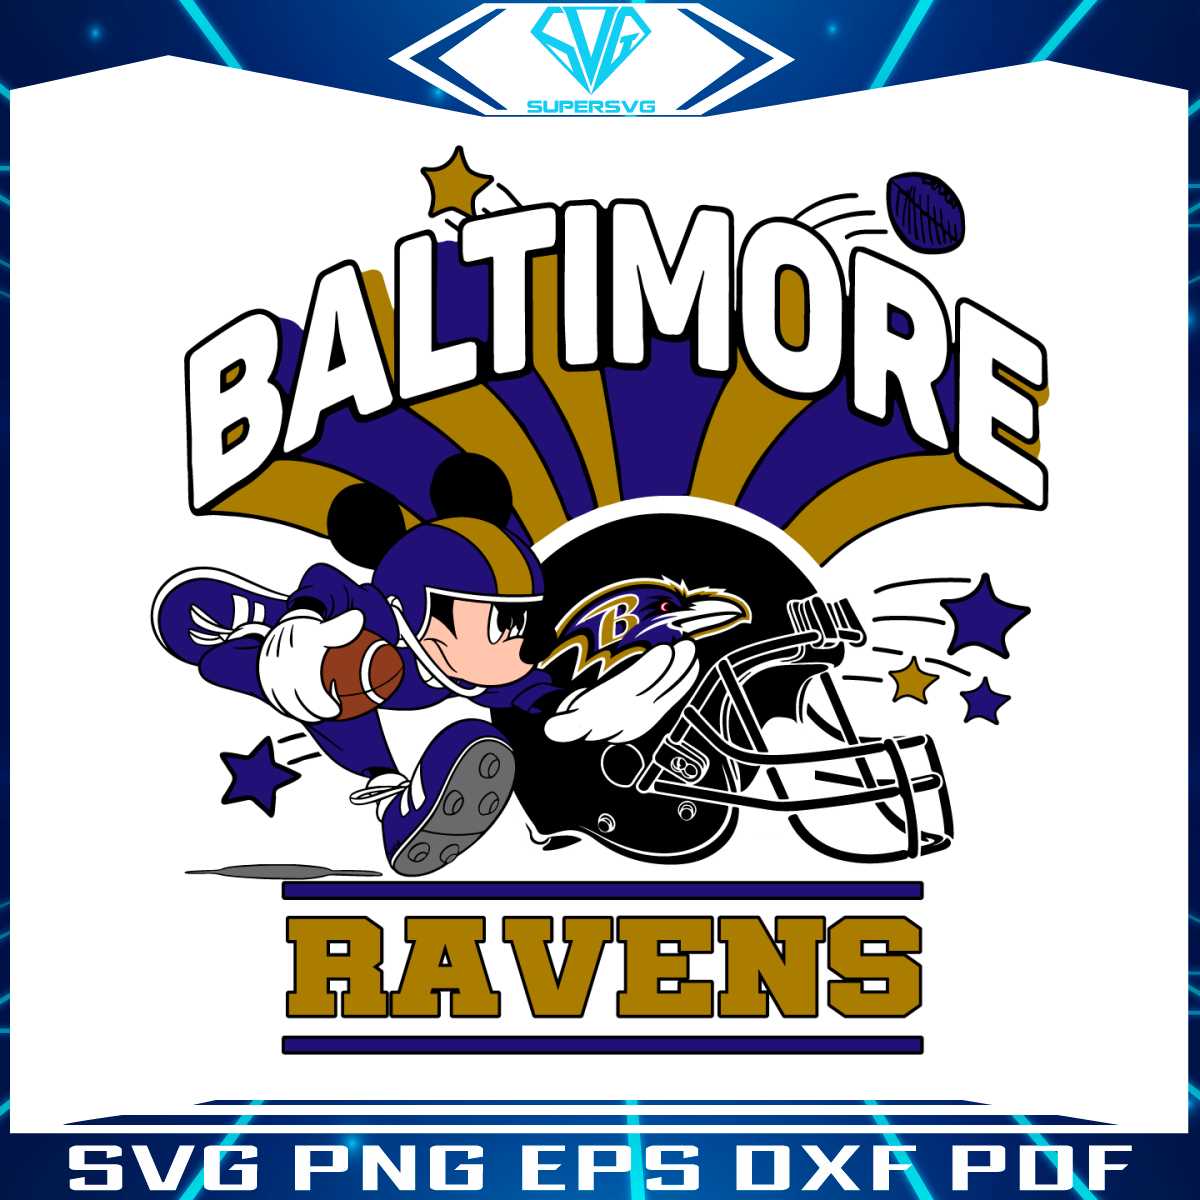 mickey-mouse-player-baltimore-ravens-football-png